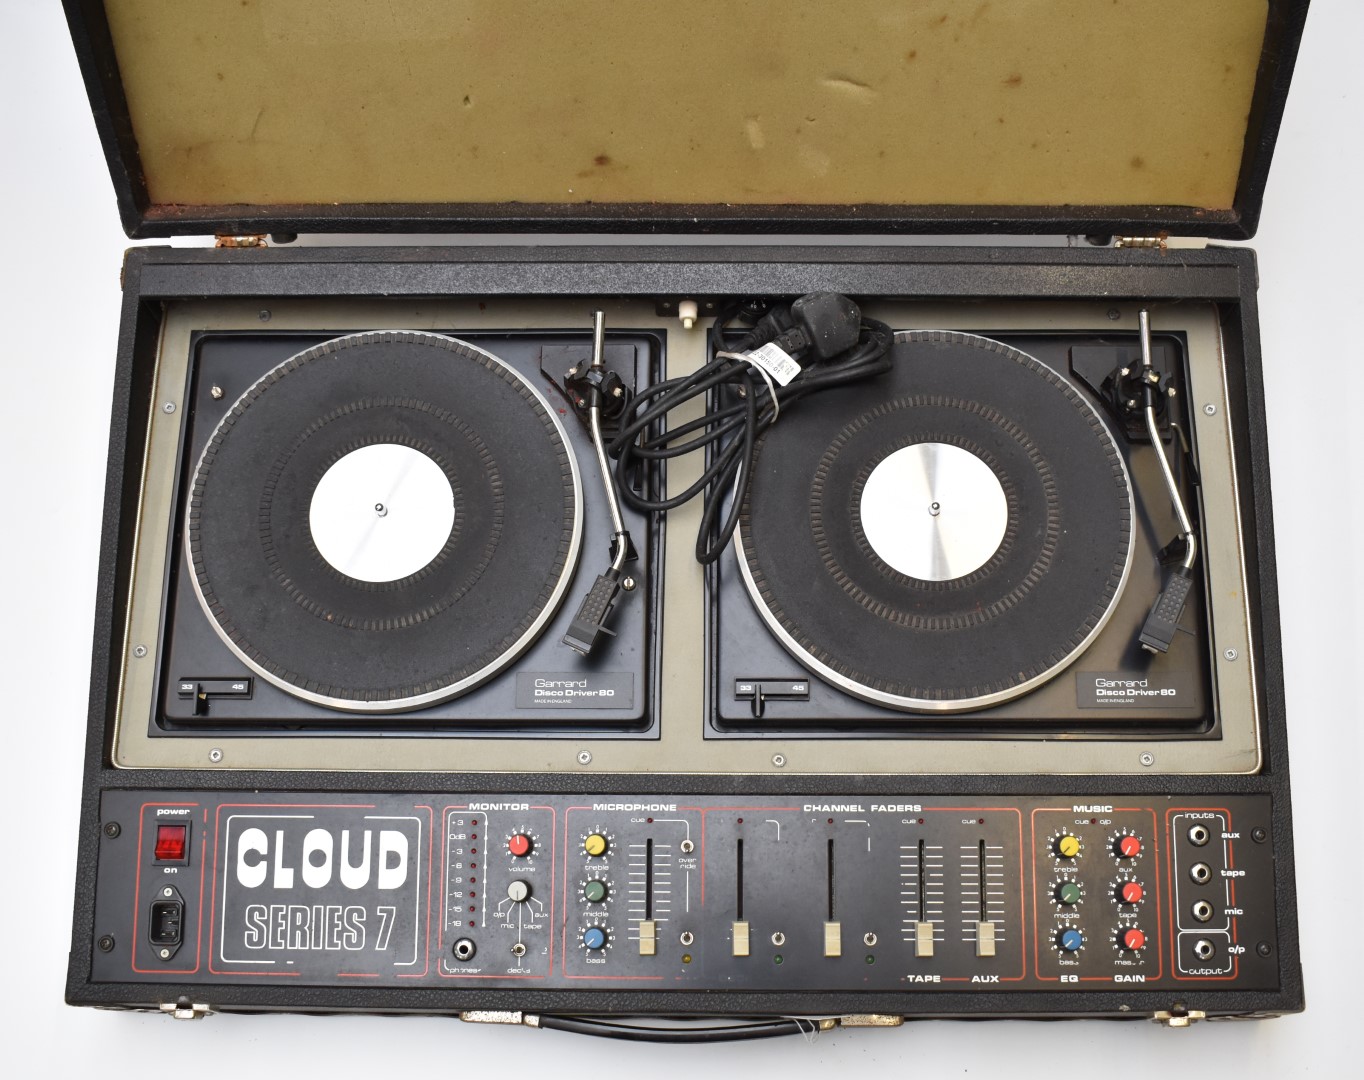 Cloud series 7 disco record deck, serial number 00437, includes two Garrard Disco Driver 80